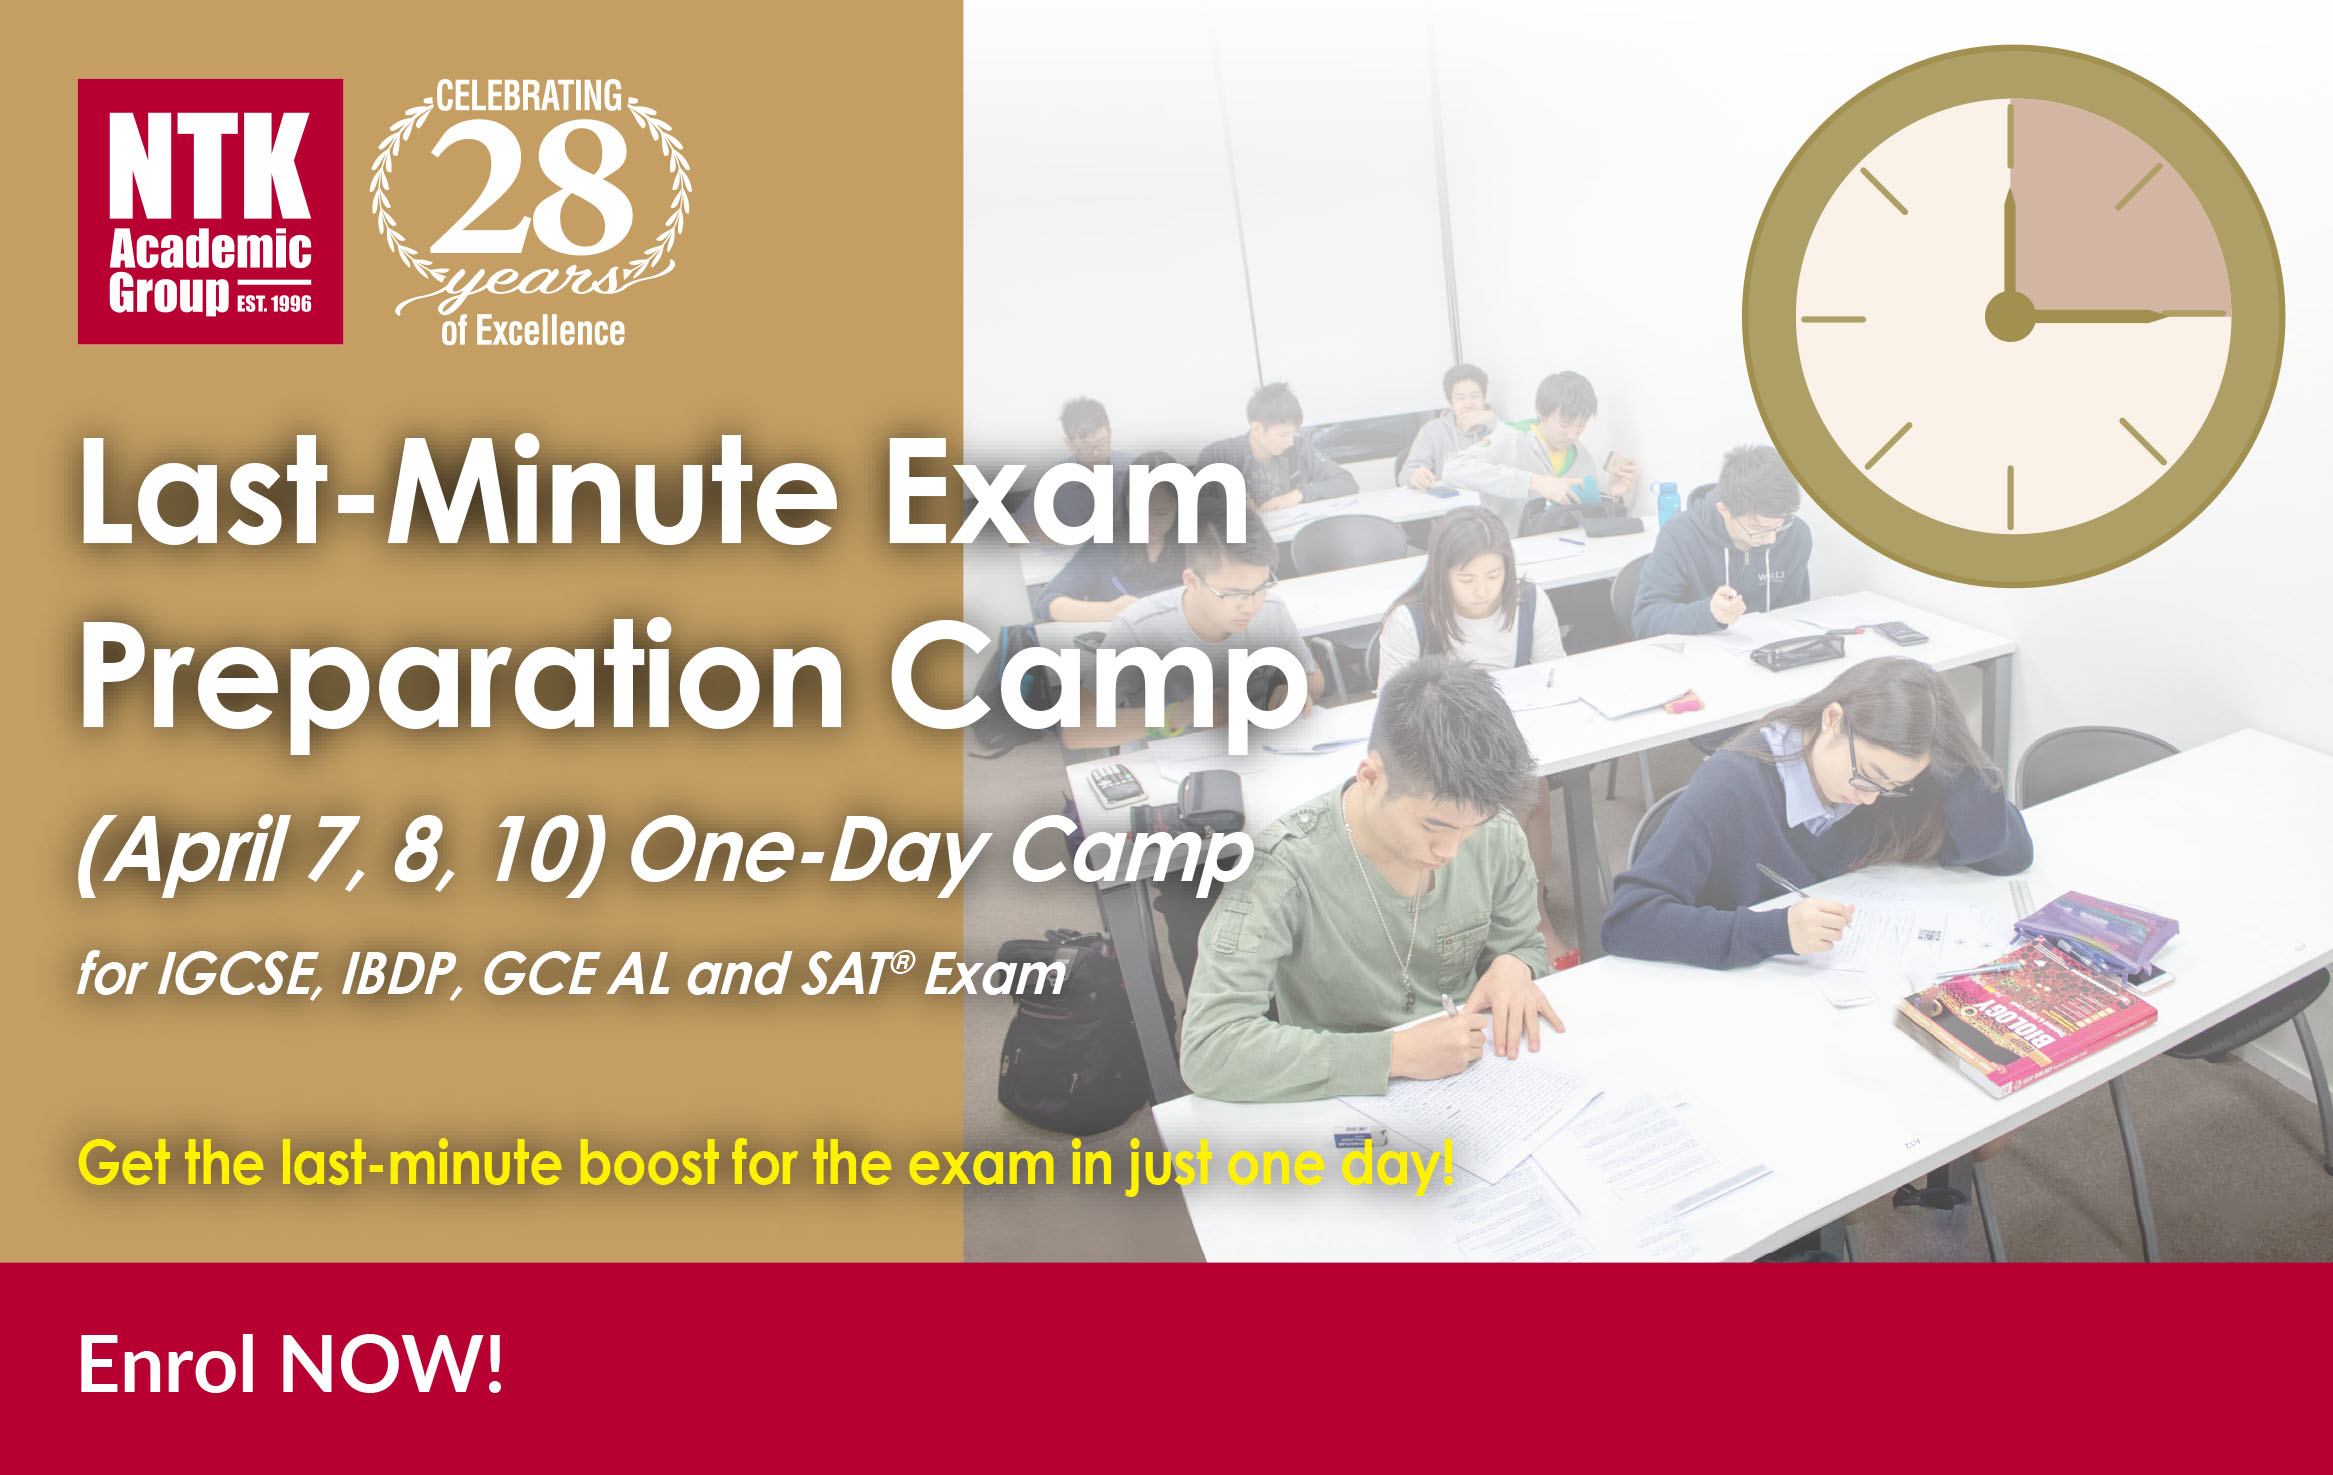 【NTK Last-Minute Day Camp】Get the Last-Minute Boost for the Exam in just One day. Enrol now!